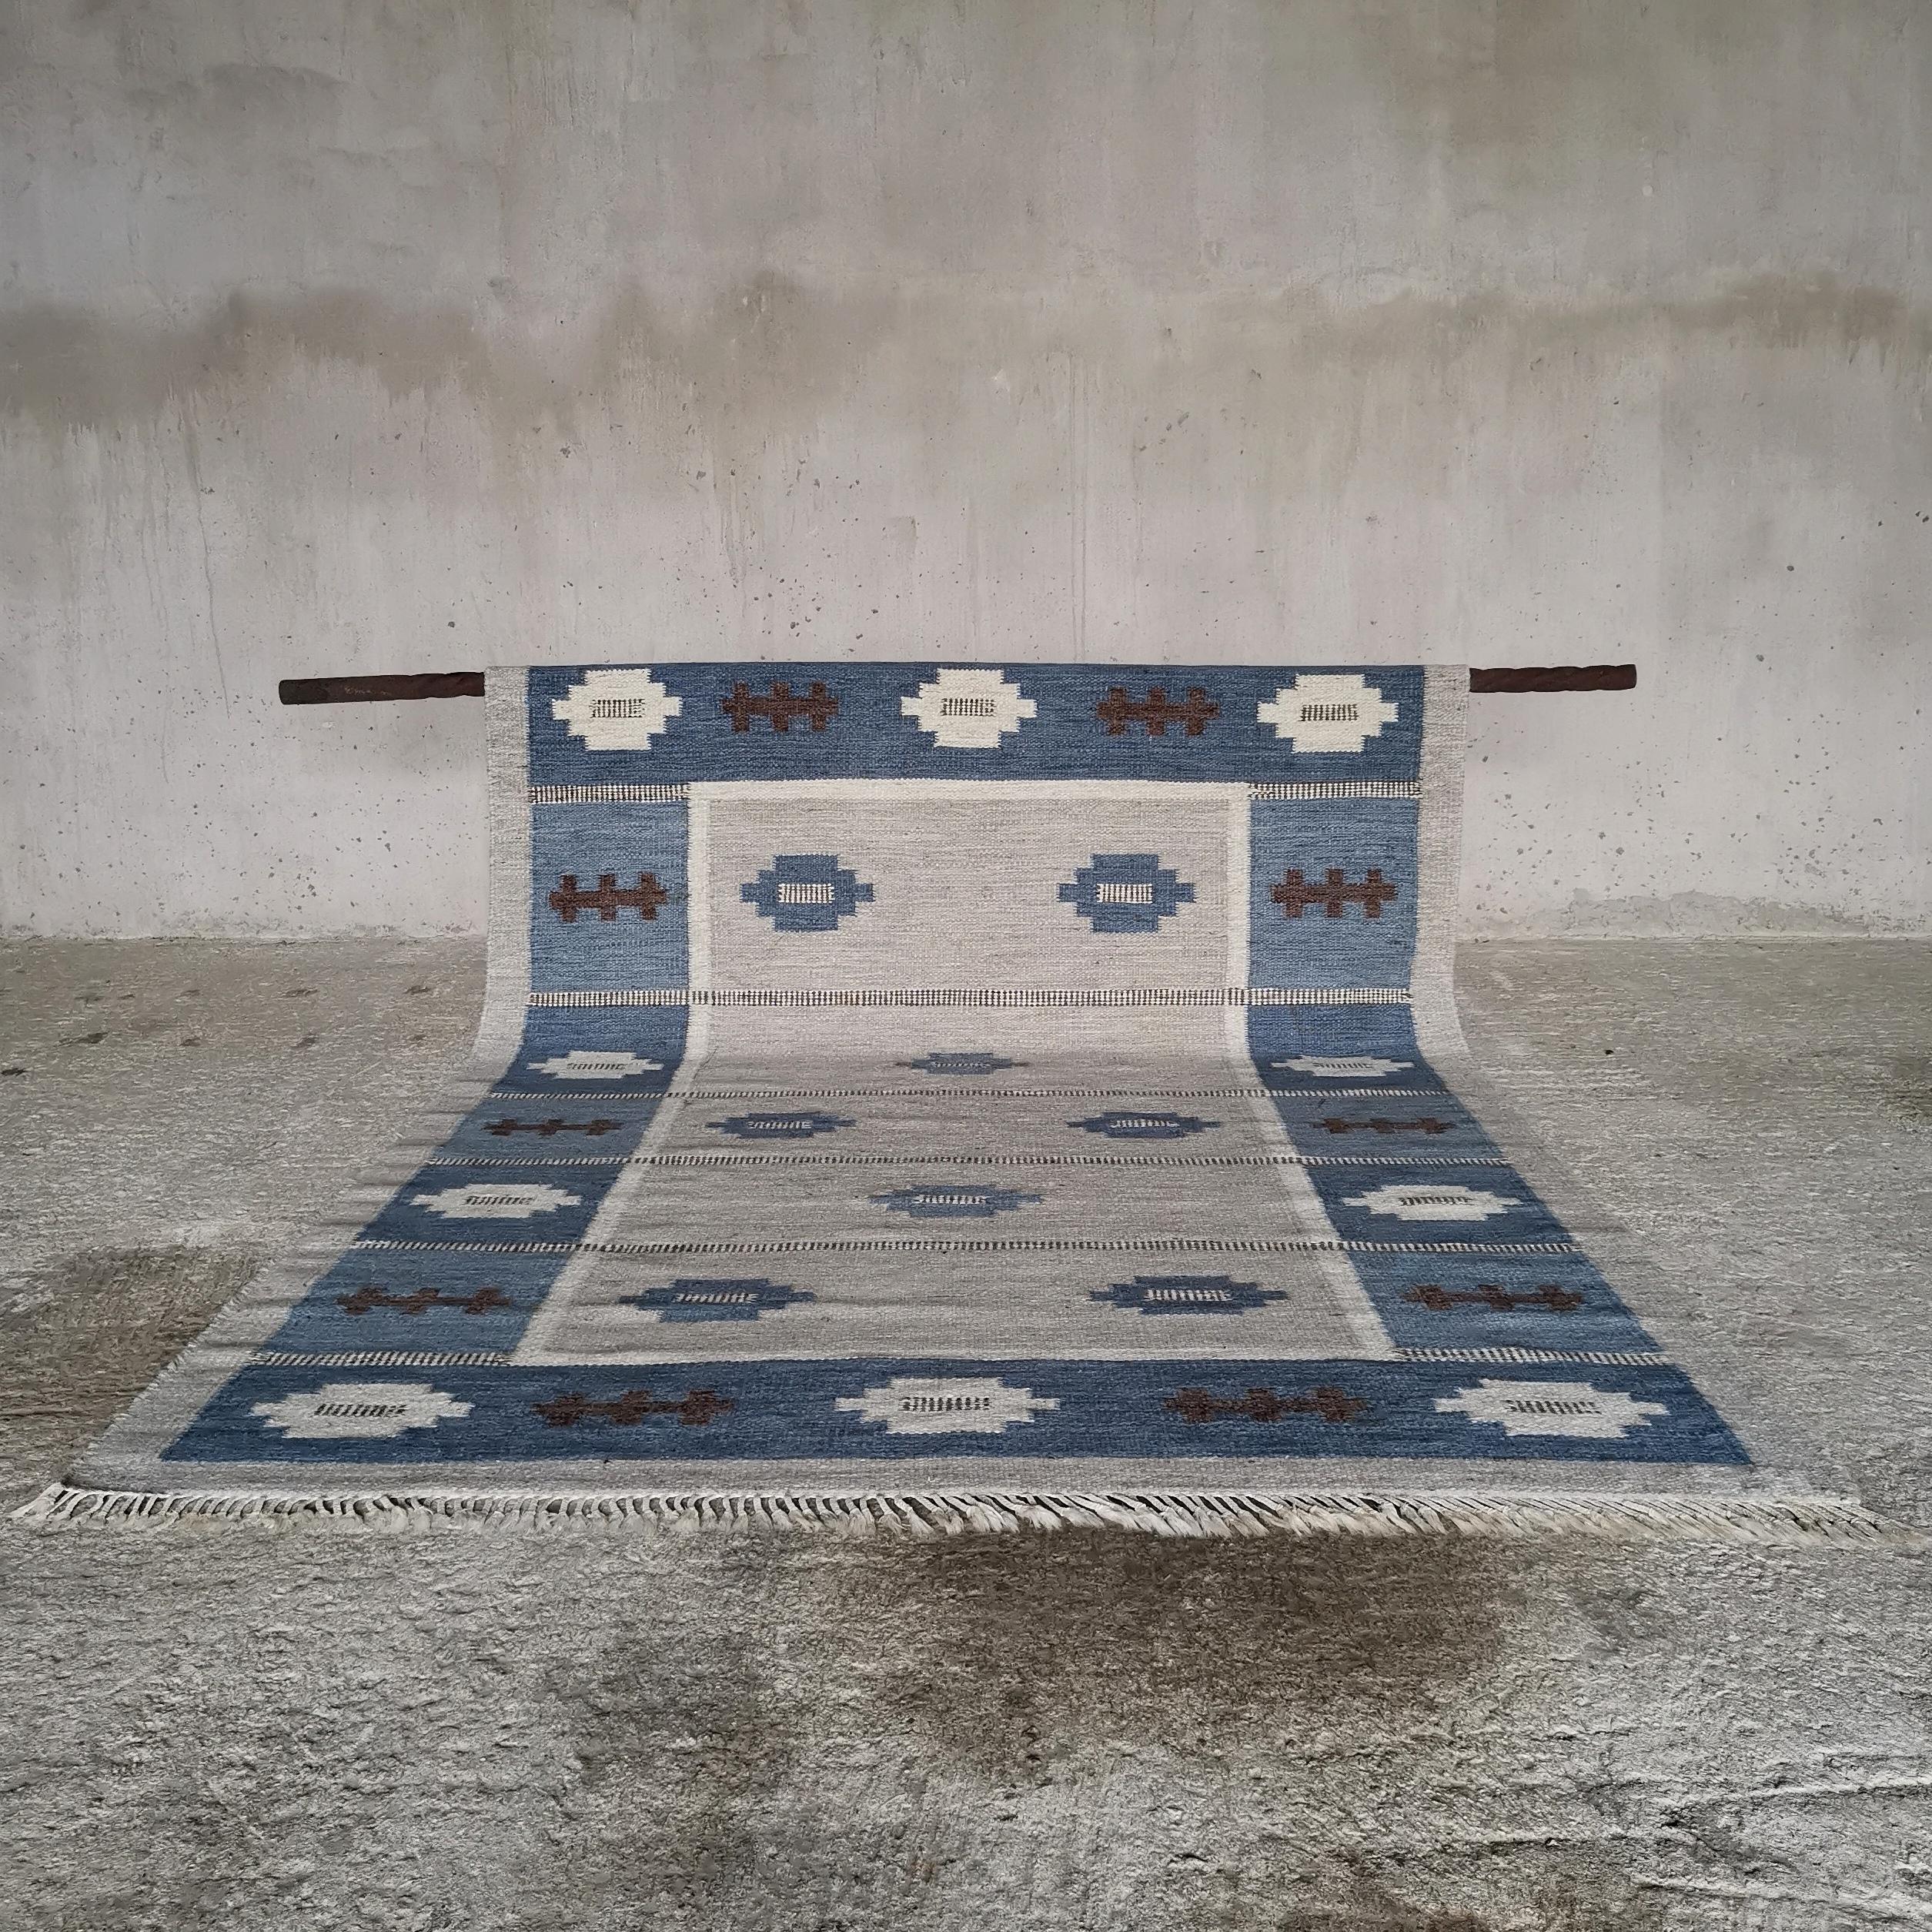 Swedish hand-knotted wool flatweave rölakan carpet by Svensk Hemslöjd, signed SH at corner, Sweden 1950s
Good vintage condition, all tassels intact. 
Lovely color palette of blue, indigo, grey, black and white colors.
Acquired from family of